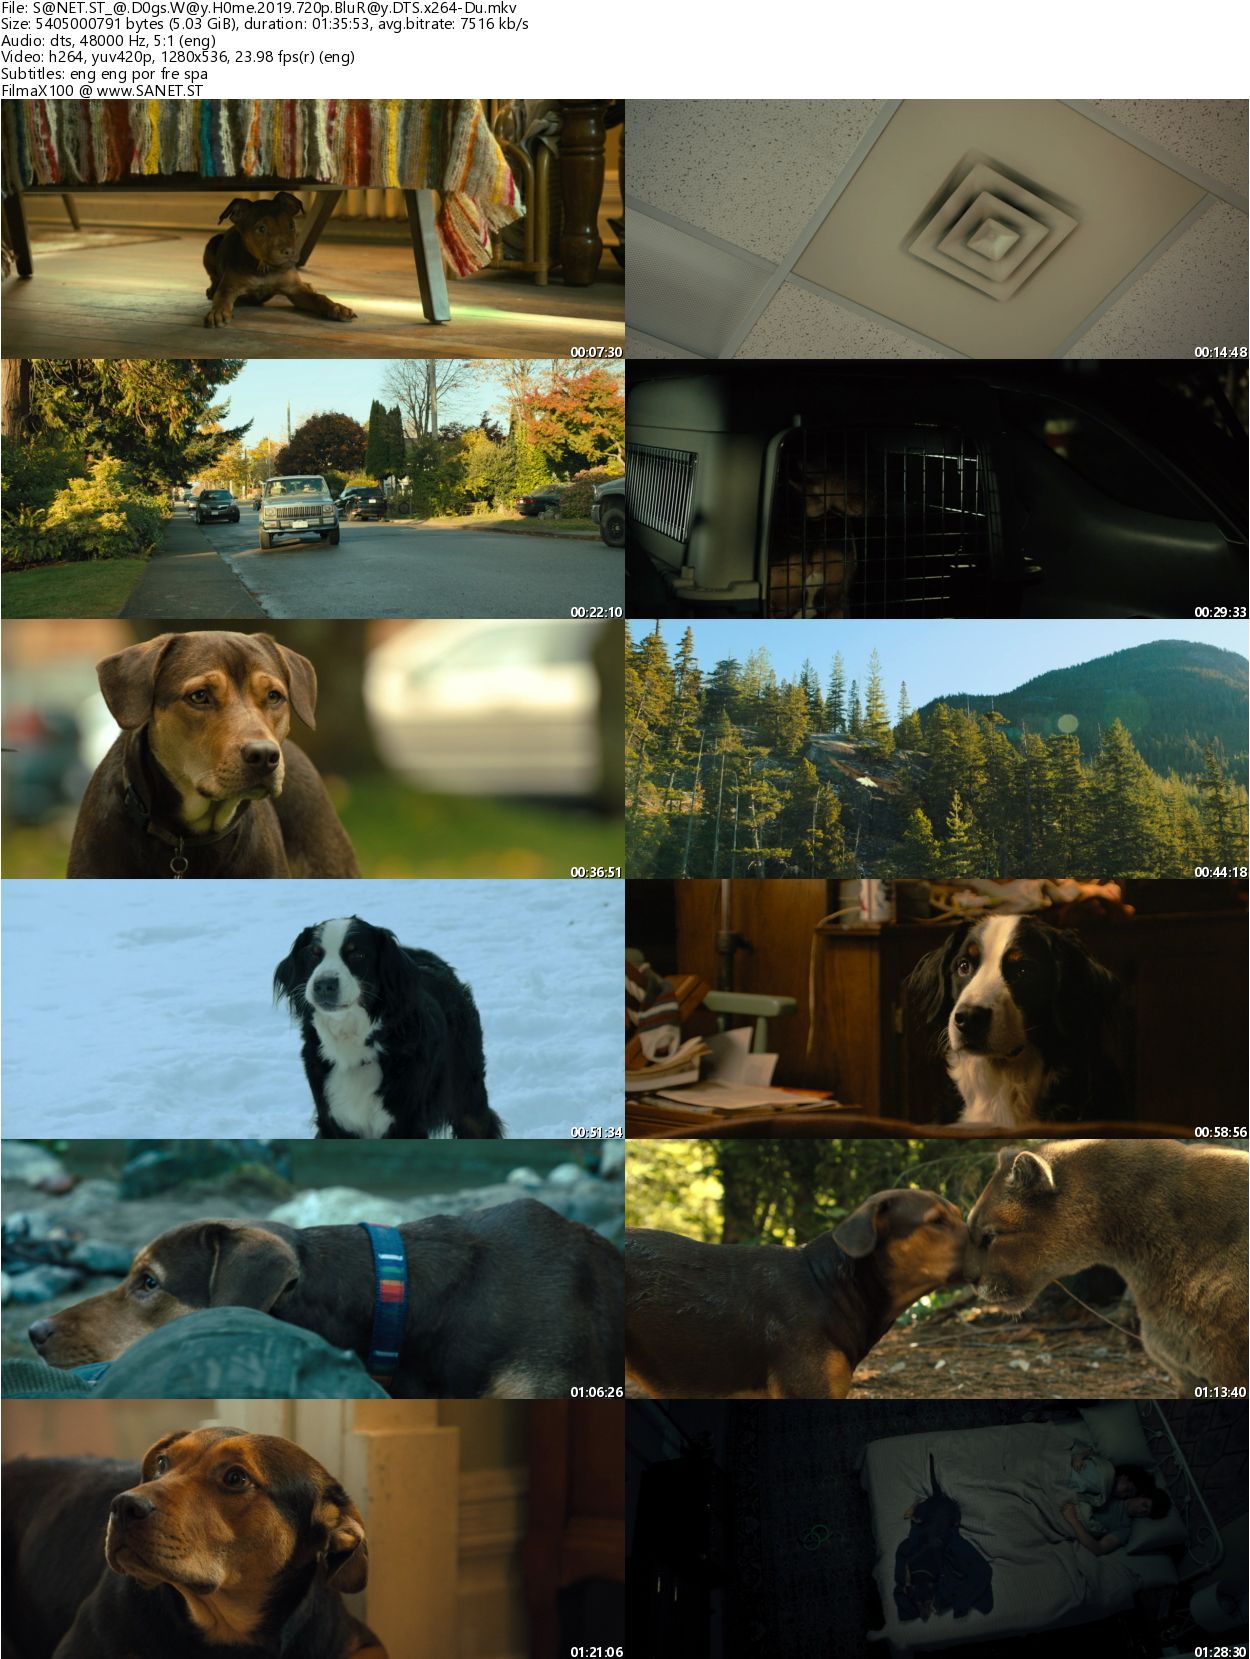 Download A Dogs Way Home 2019 720p BluRay DTS x264-Du - SoftArchive